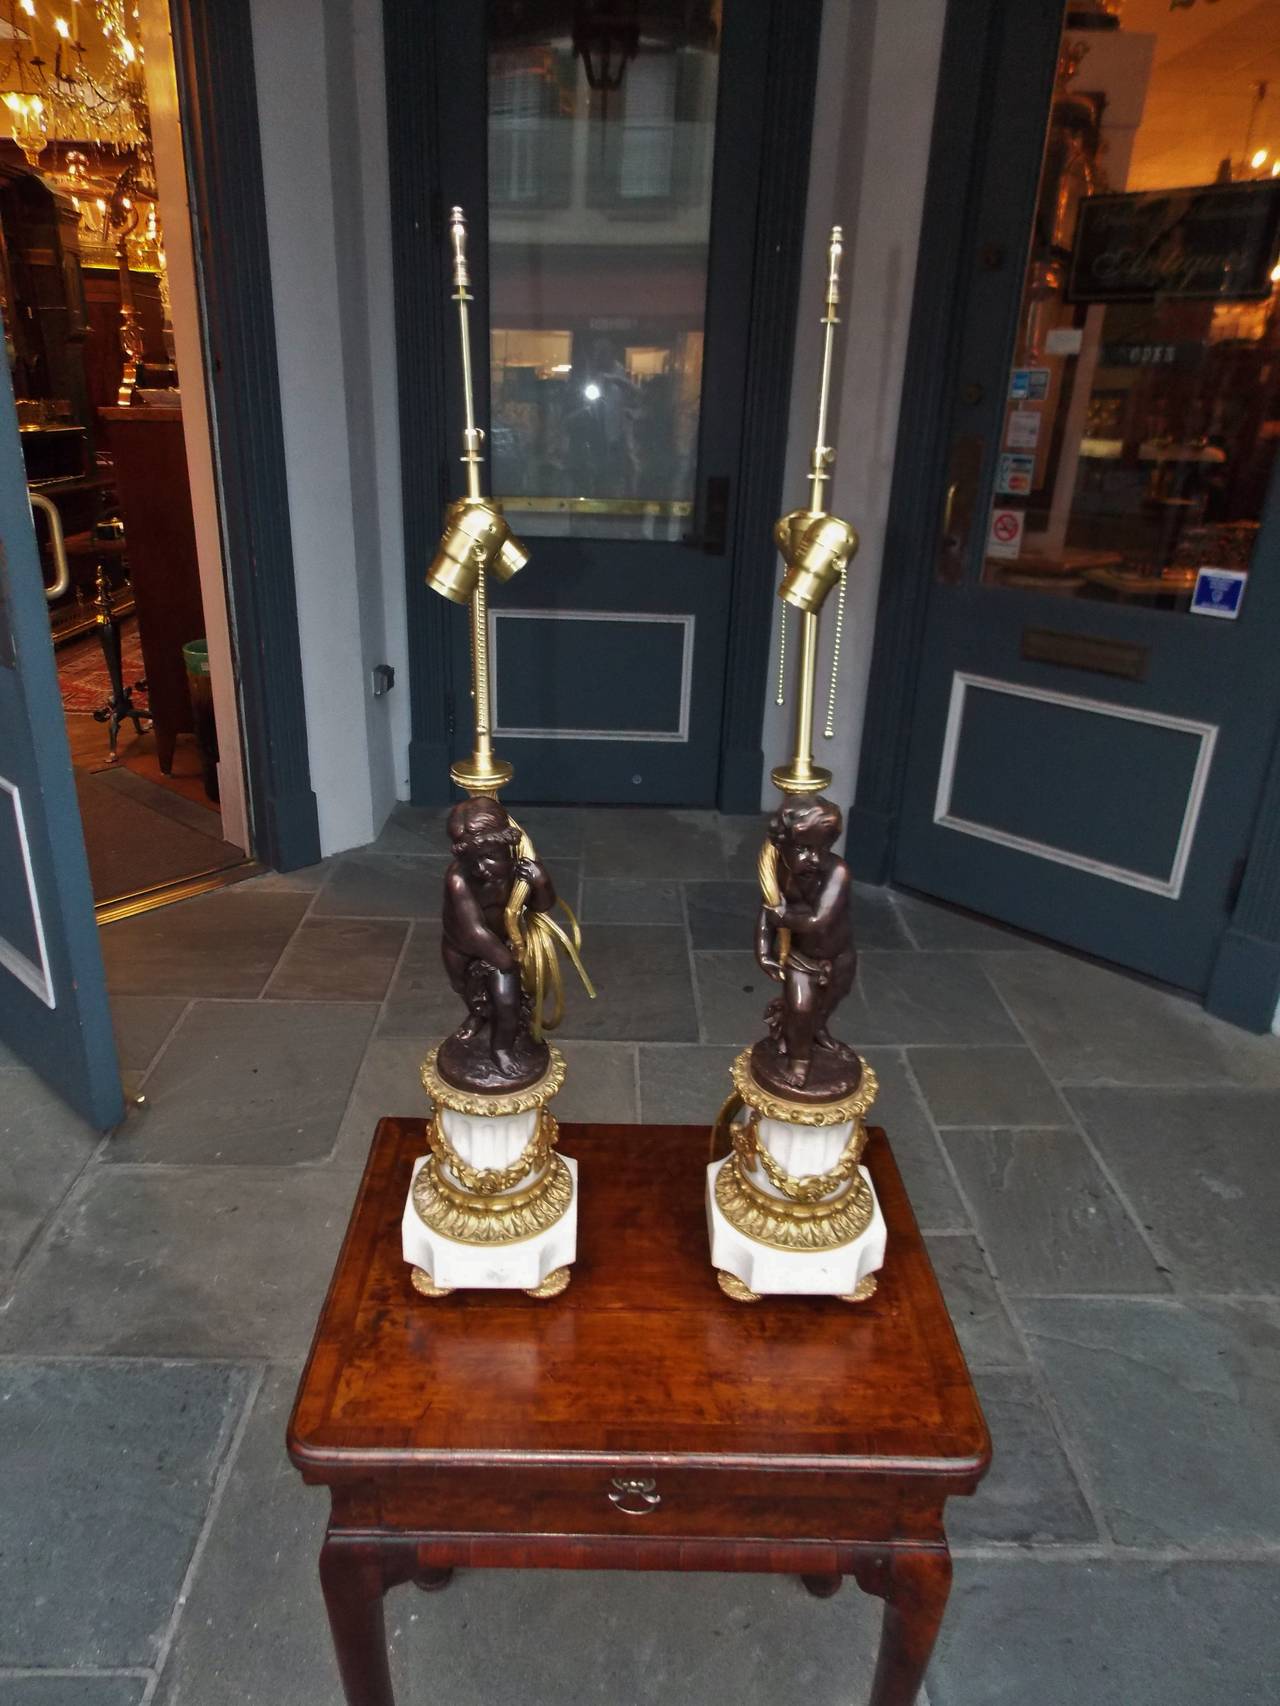 Pair of French ormolu bronze and fluted marble cherub table lamps with decorative floral swags, lambs tongue, and resting on decorative gilt bronze circular feet. Originally candle powered and has been electrified,  Early 19th Century.